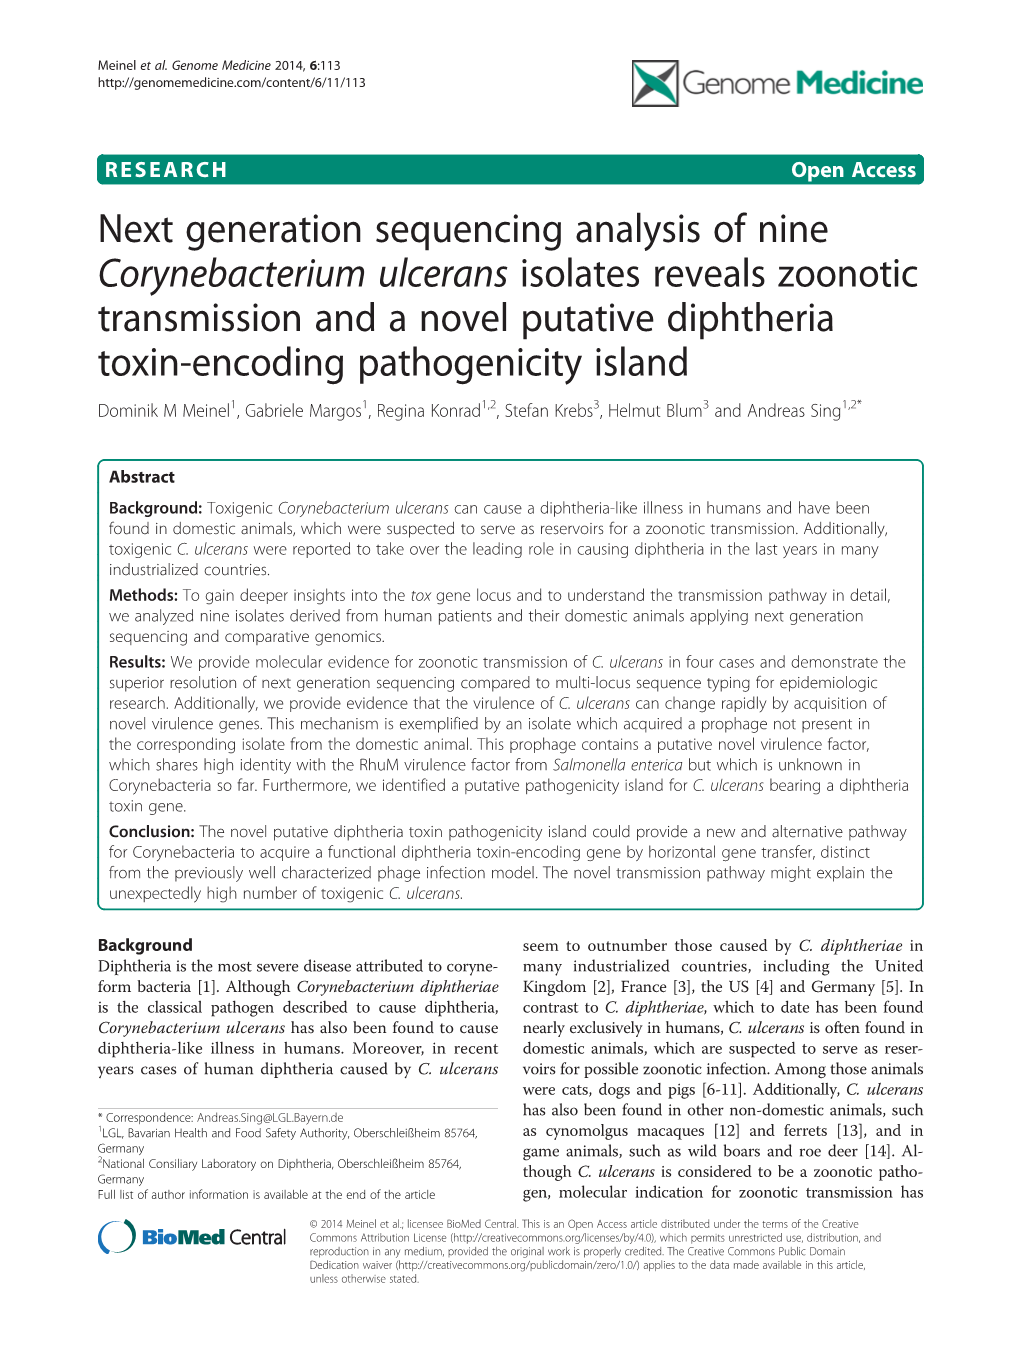 Next Generation Sequencing Analysis of Nine